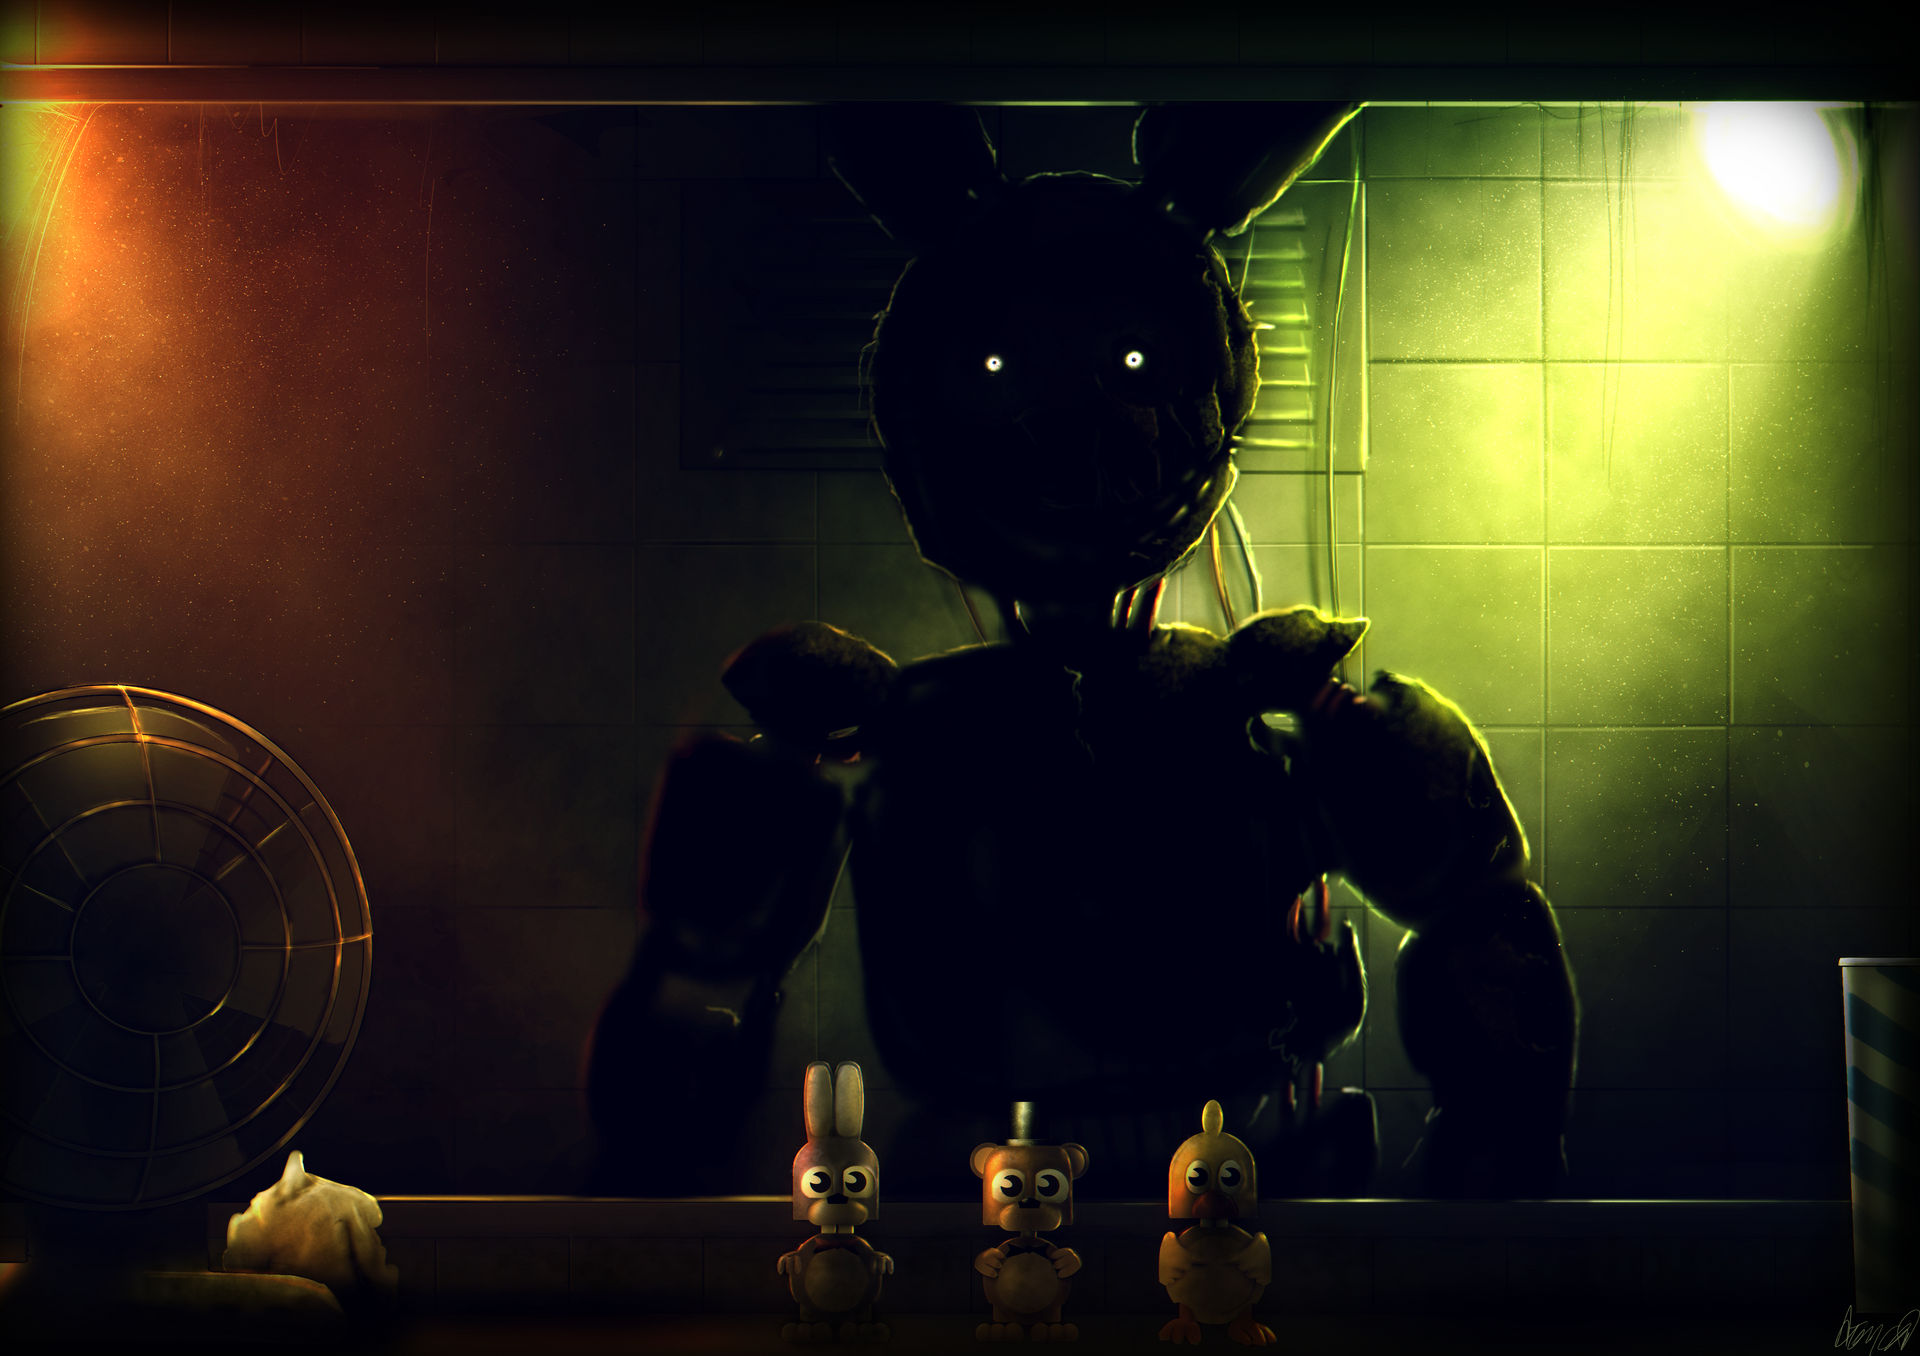 Five Nights At Freddy's 3 by thewebsurfer97 on DeviantArt